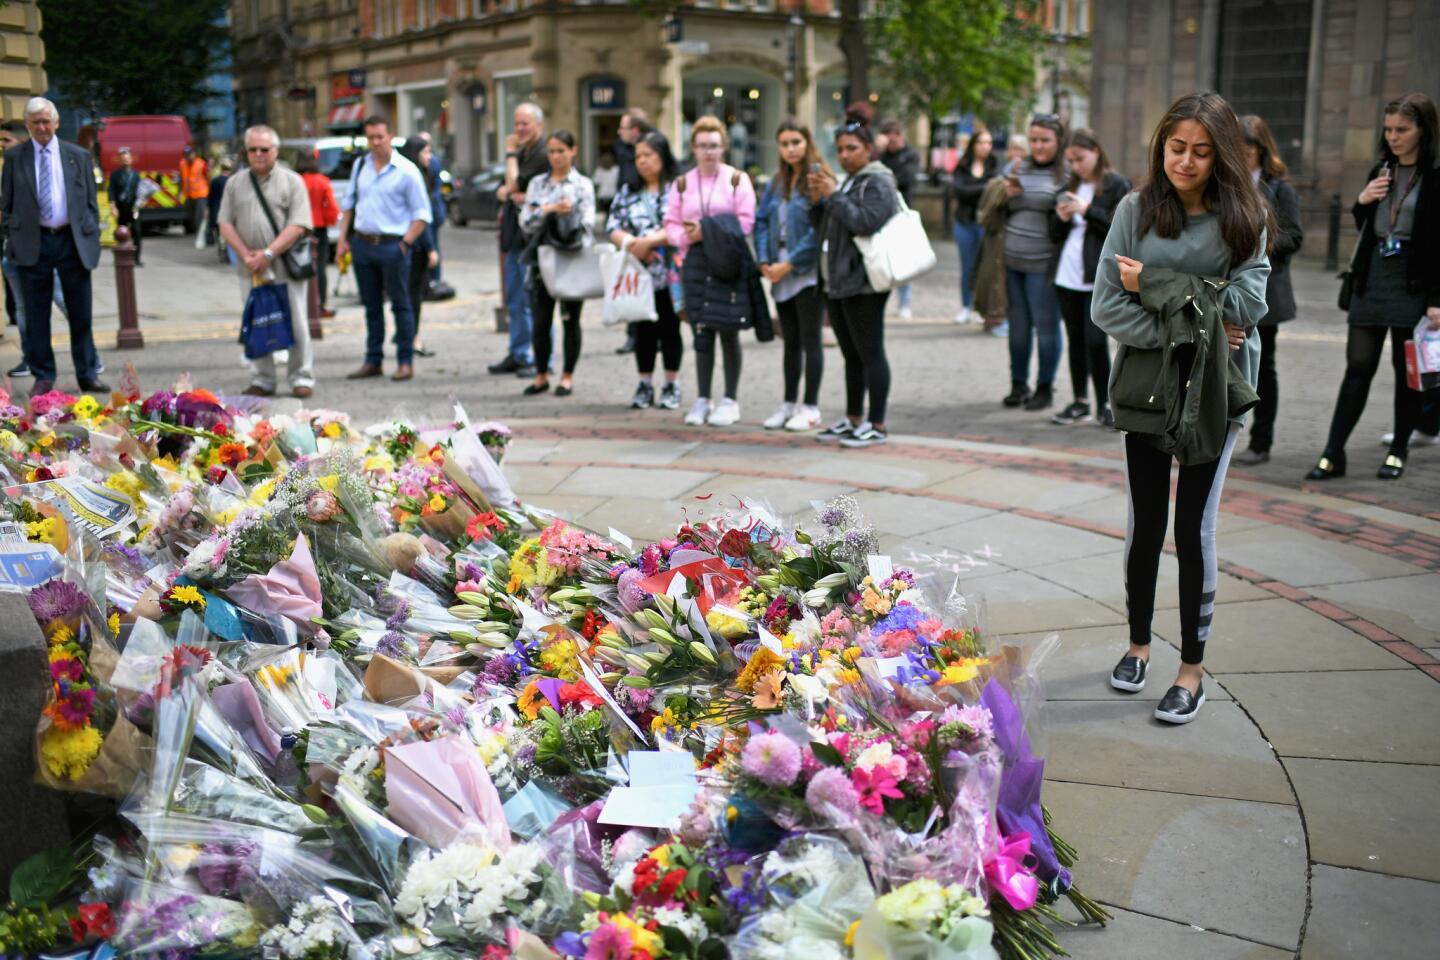 People pause to look at floral tributes and messages in St. Ann Square on May 24, 2017, in Manchester, England.